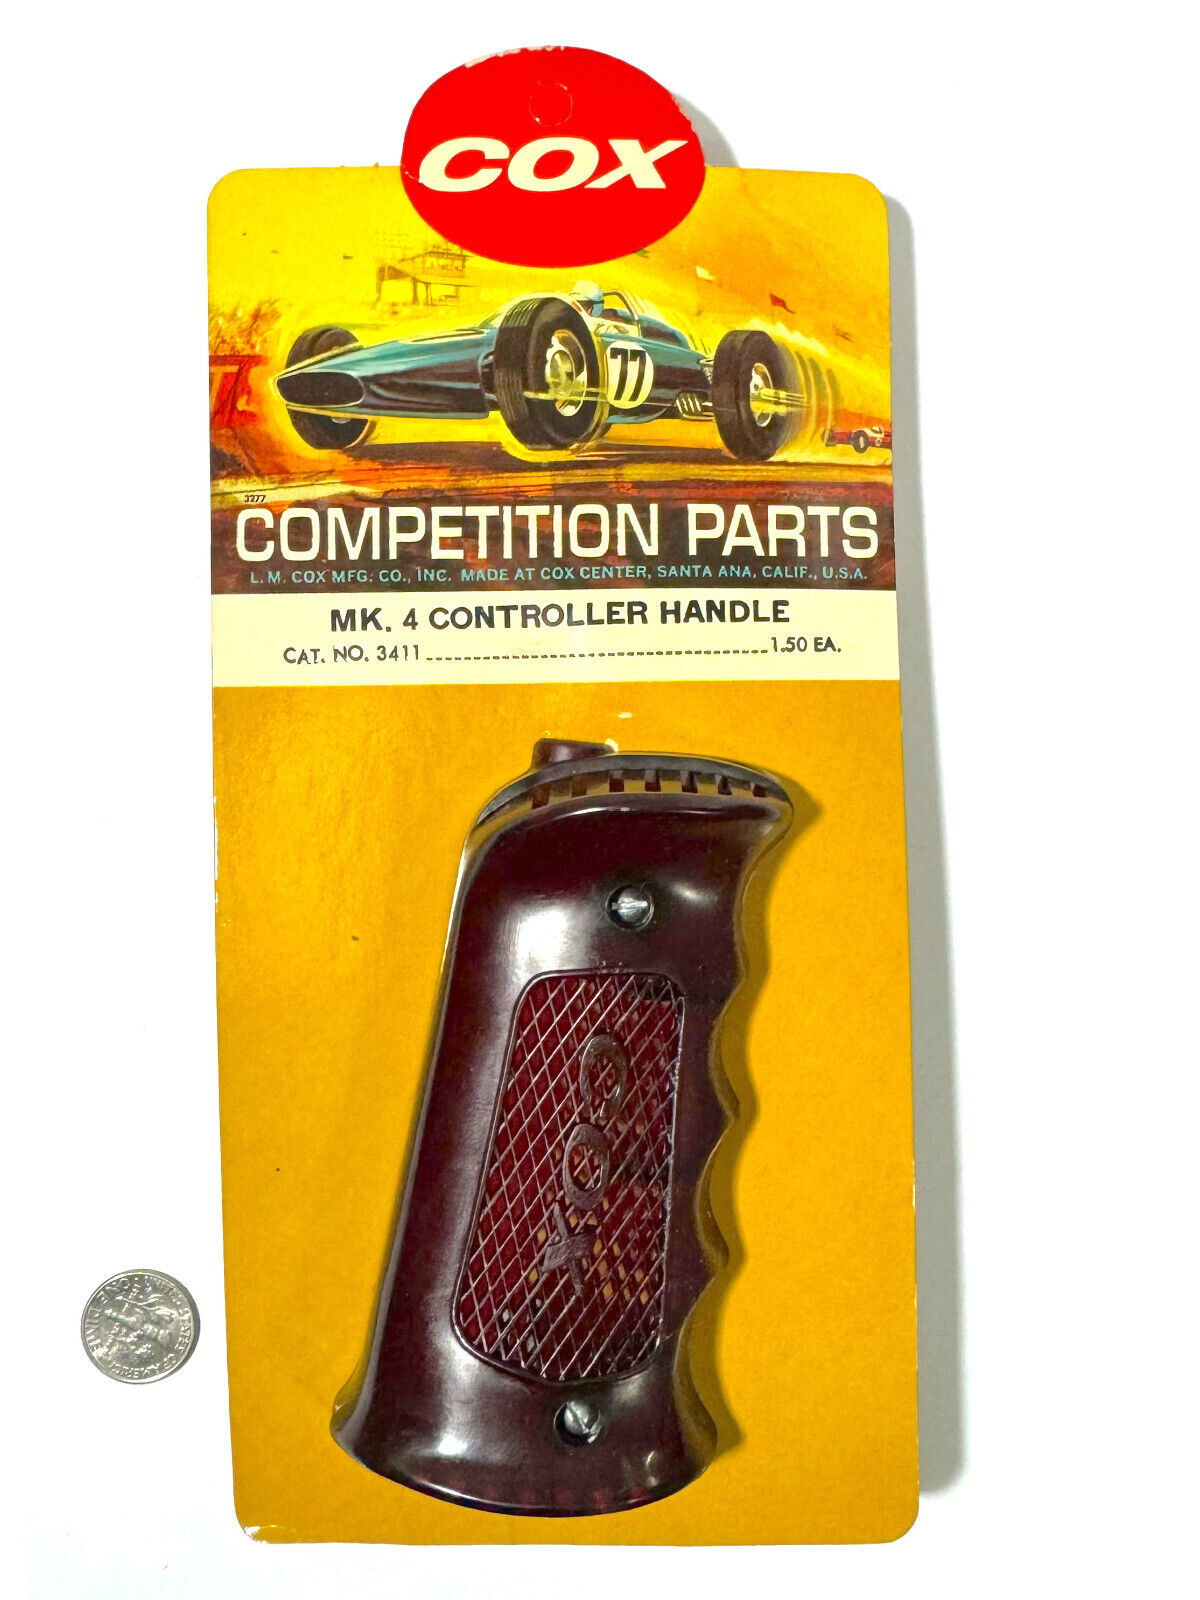 L.M. Cox CA USA Made Slot Car Competition Parts MARK 4 CONTROLLER HANDLE #3411